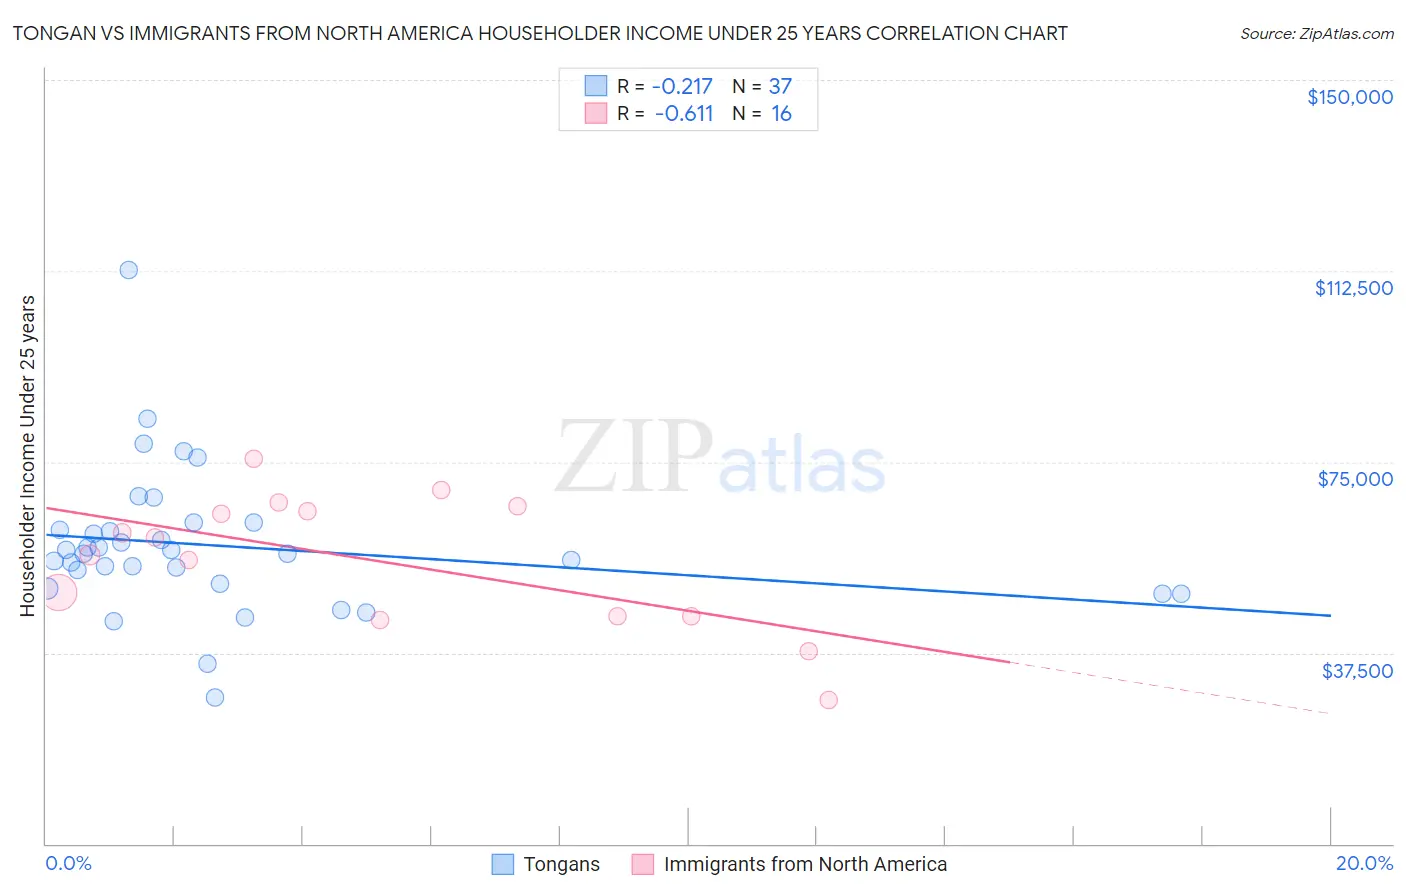 Tongan vs Immigrants from North America Householder Income Under 25 years